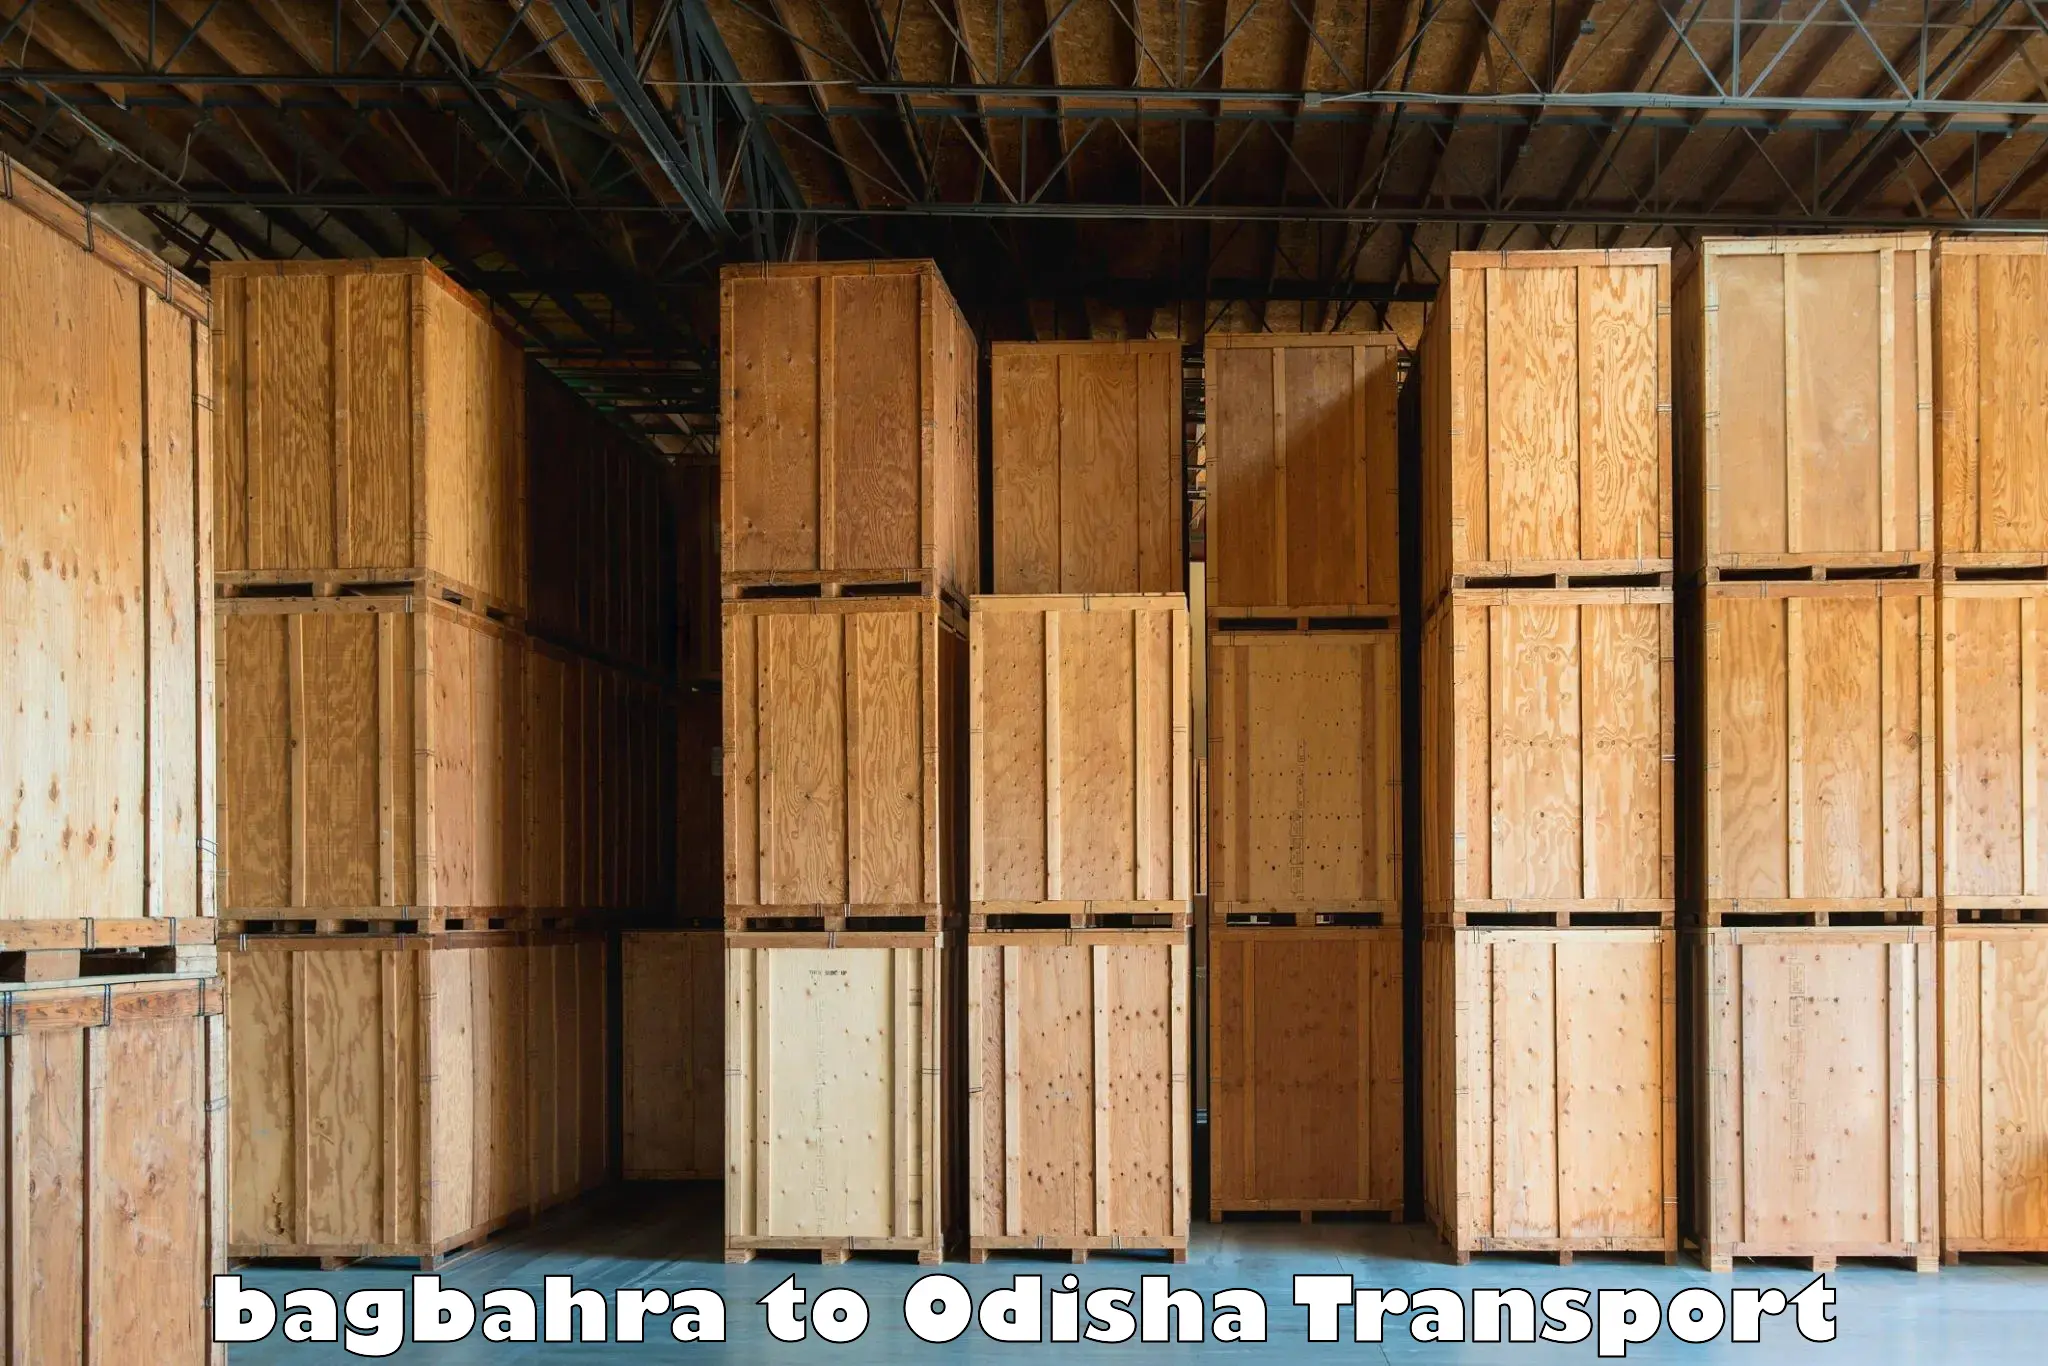 Transport shared services bagbahra to Kalinga Institute of Industrial Technology Bhubaneswar